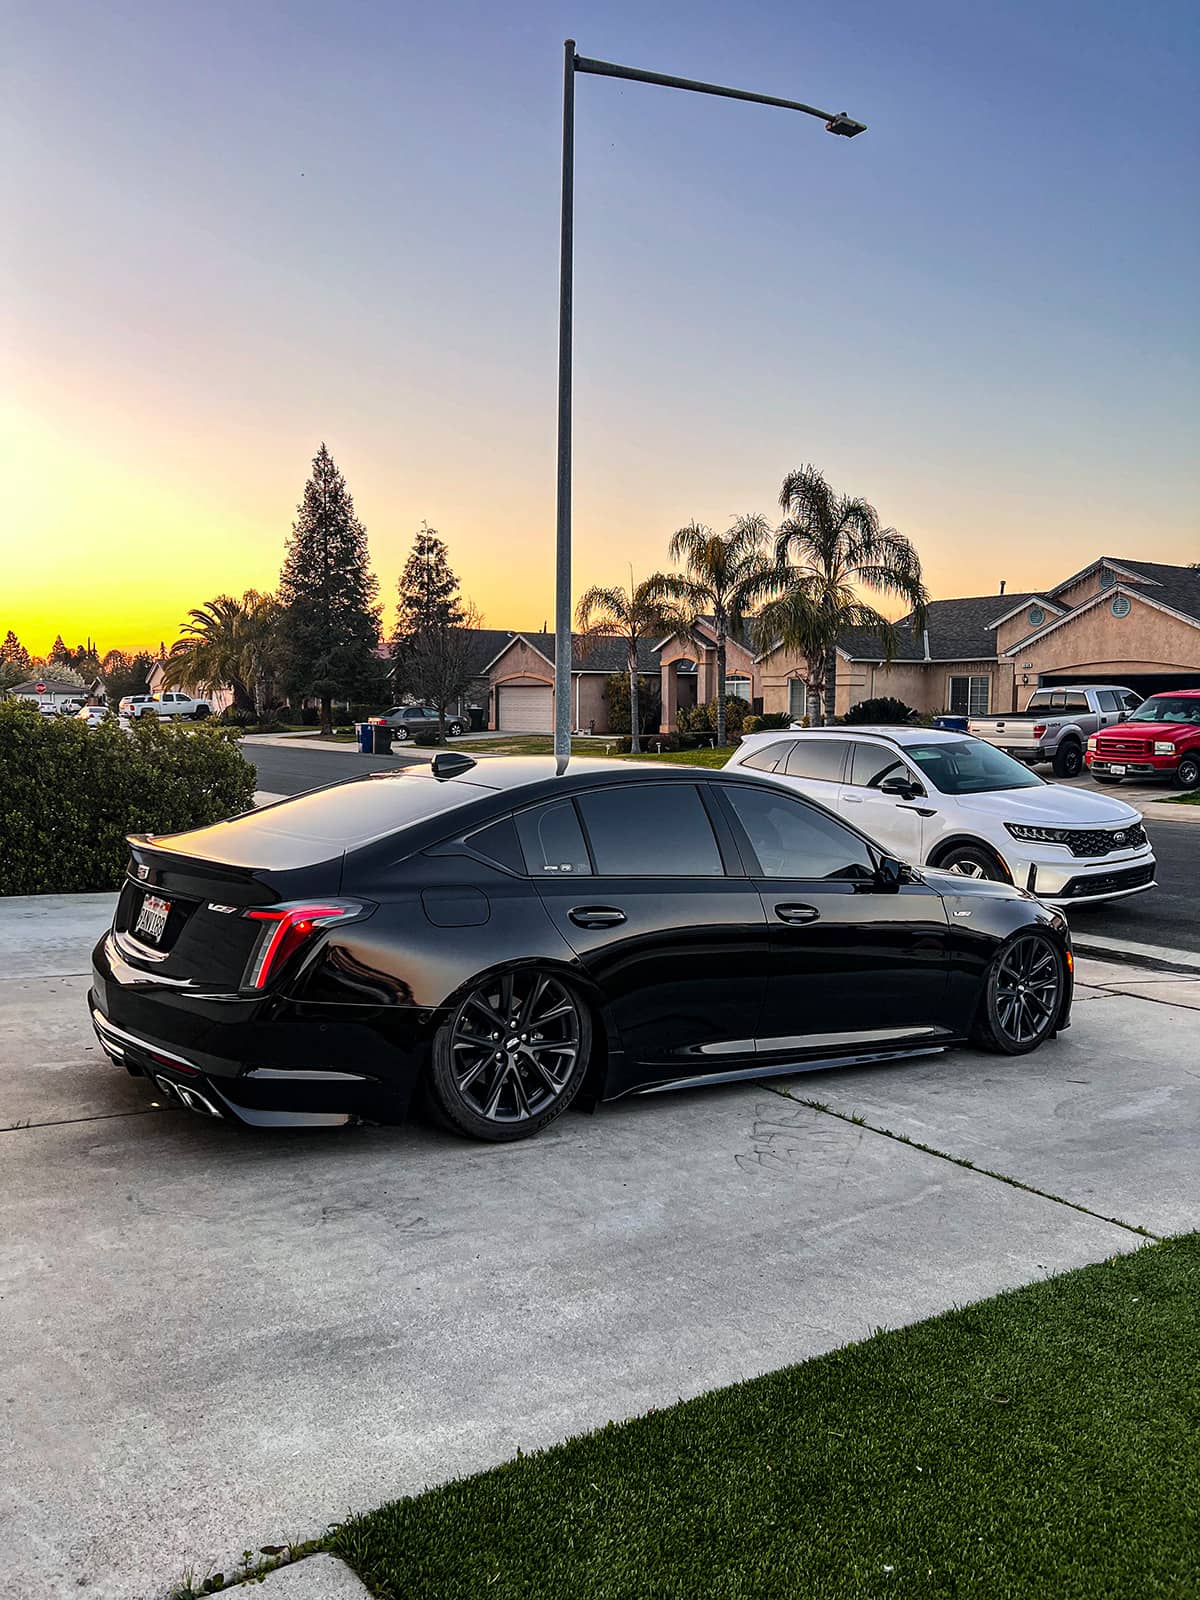 Cadillac CT5V-Blackwing air suspension by Air lift with management